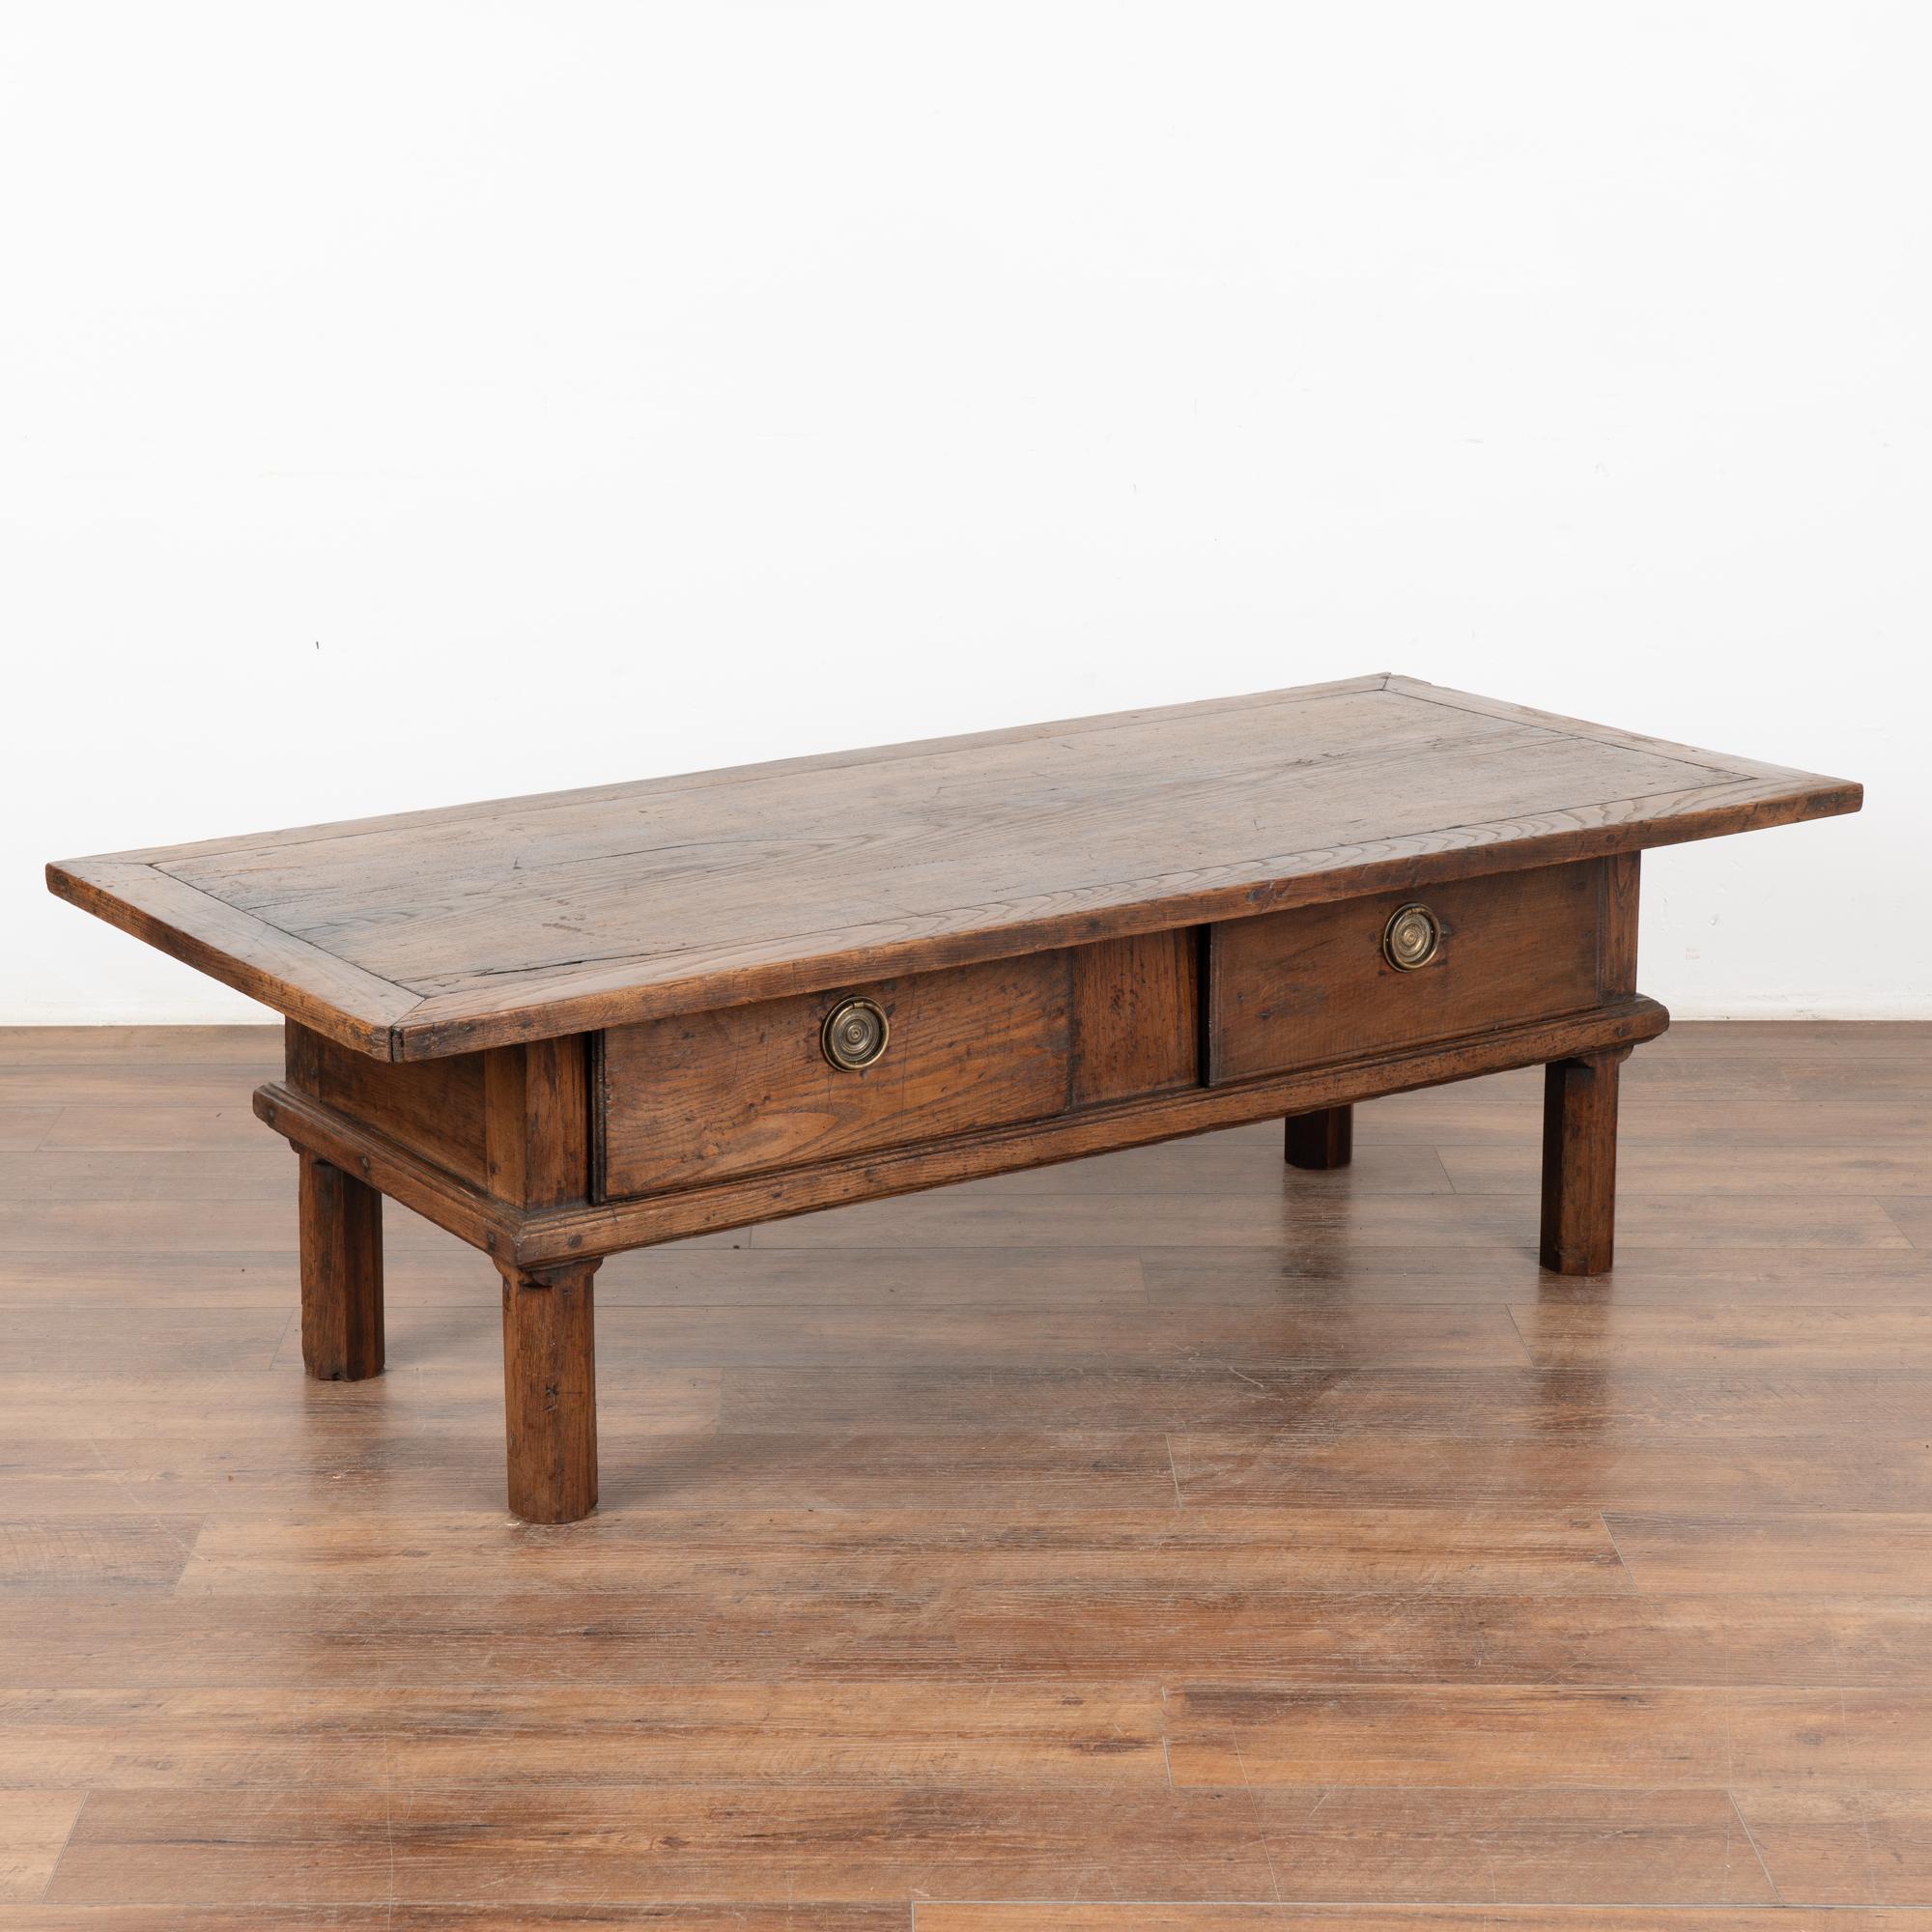 The rustic appeal of this oak coffee table comes from the aged patina of the worn wood.
Every scratch, nick, crack , gouge and stain simply add to the strong draw of this French country coffee table with two drawers.
Restored, solid, stable and